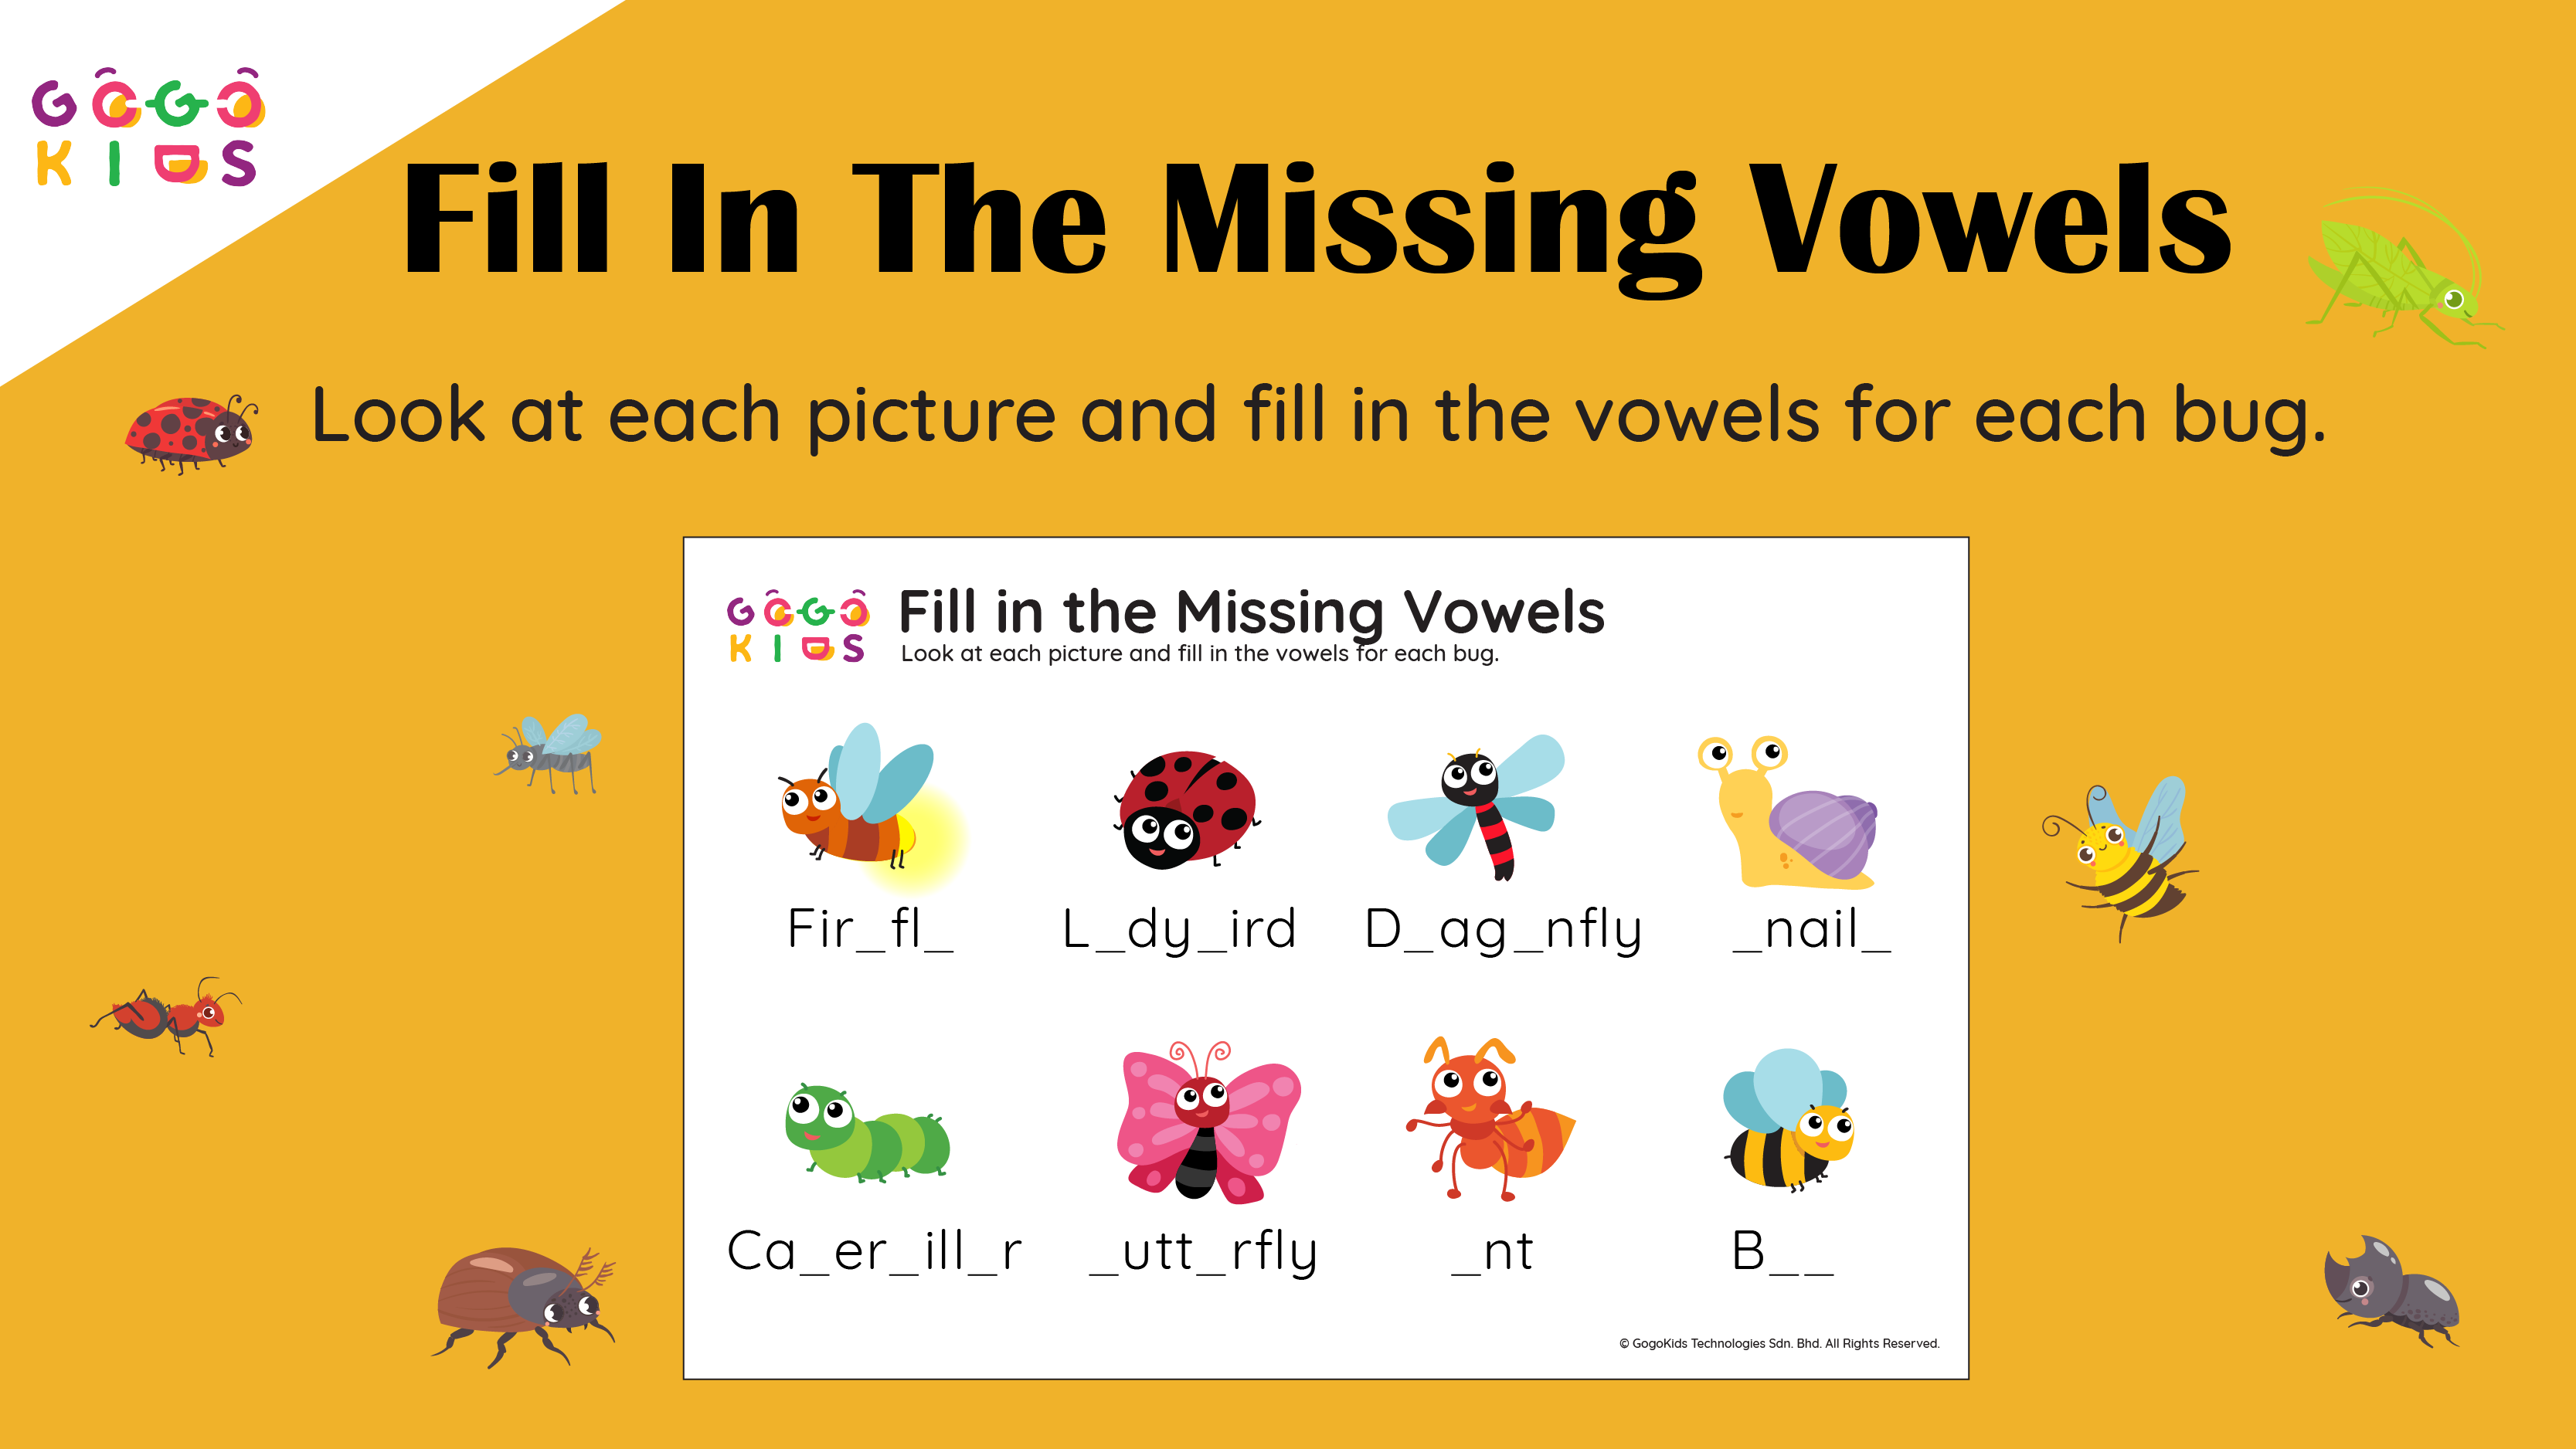 Words and Numbers: Fill In The Missing Vowels